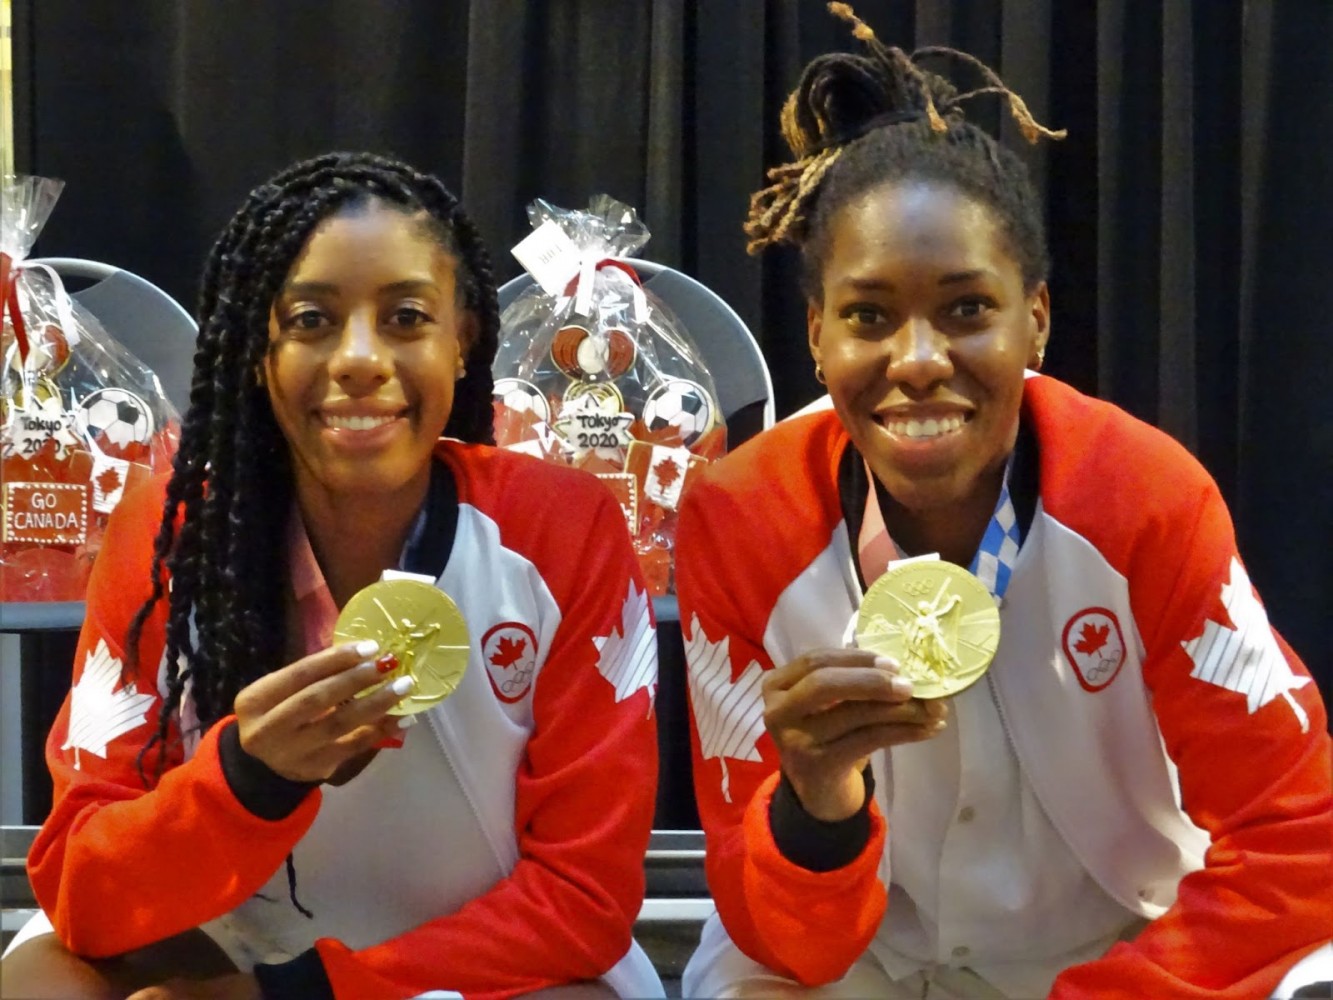 New Brampton soccer pitches will be named after gold medalists Kadeisha Buchanan & Ashley Lawrence; is a Canadian professional league next?